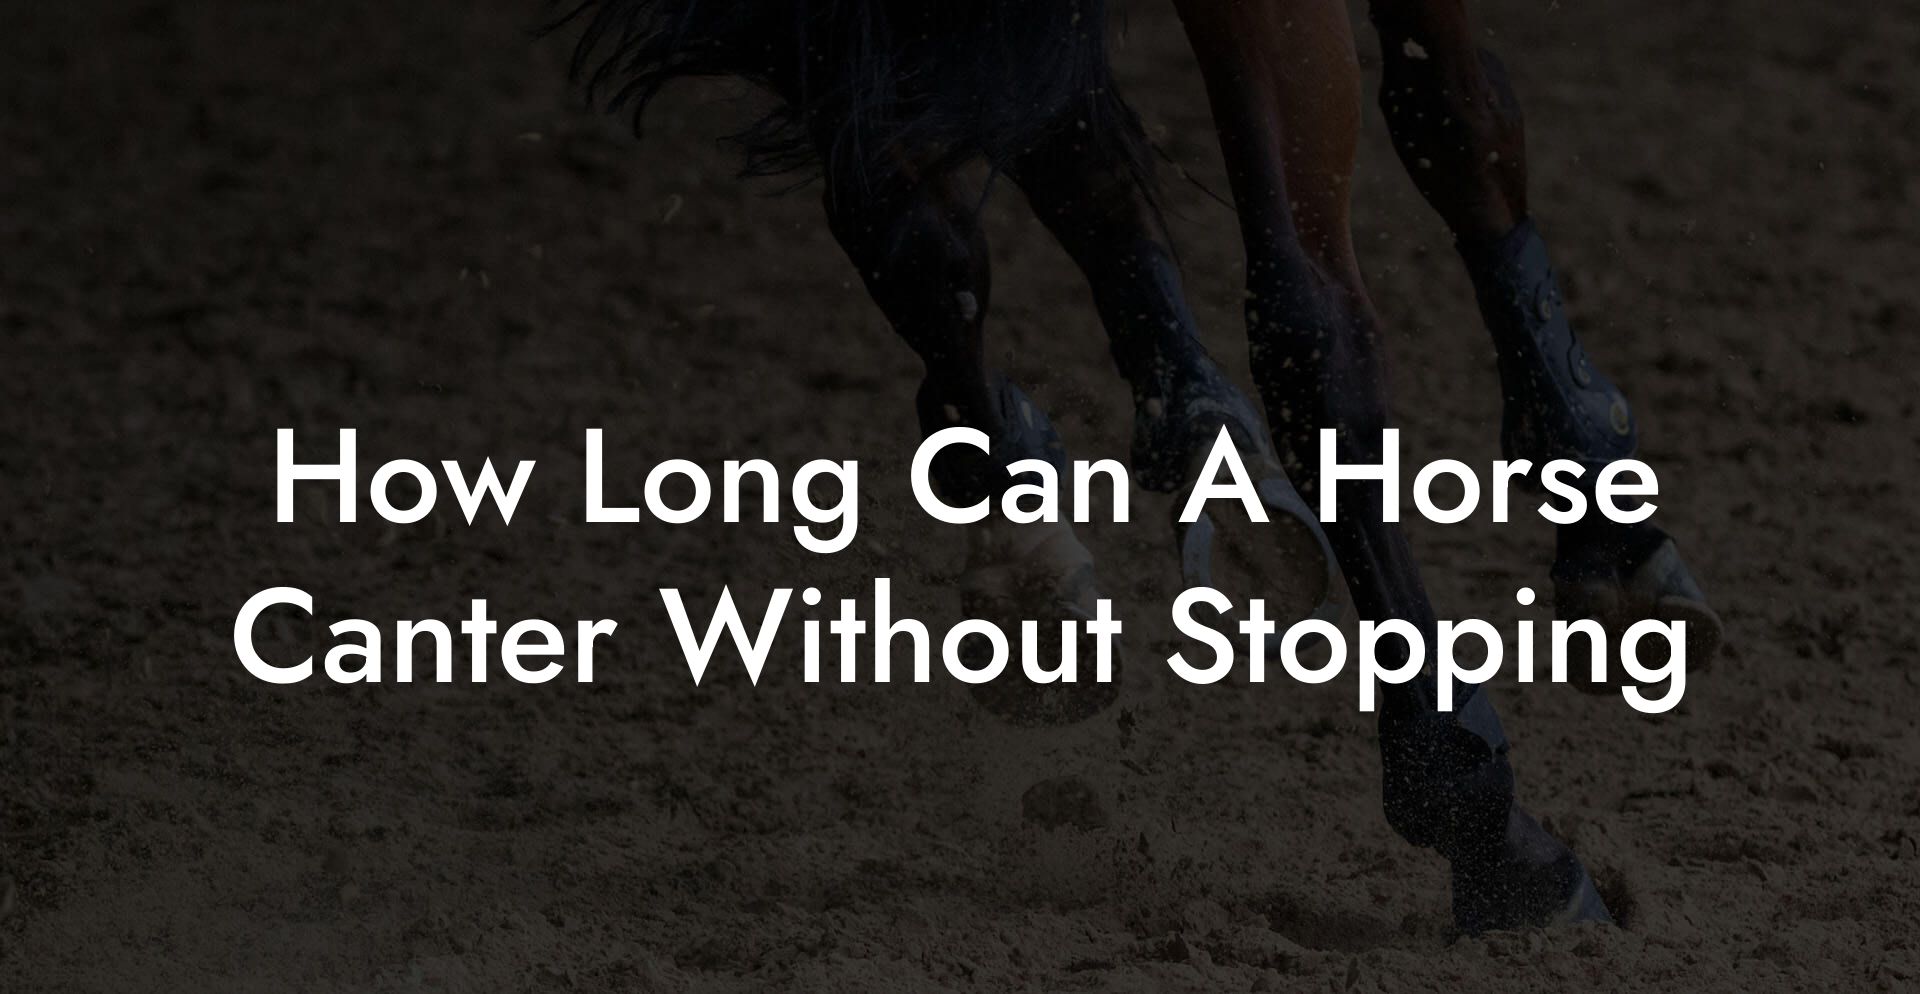 How Long Can A Horse Canter Without Stopping